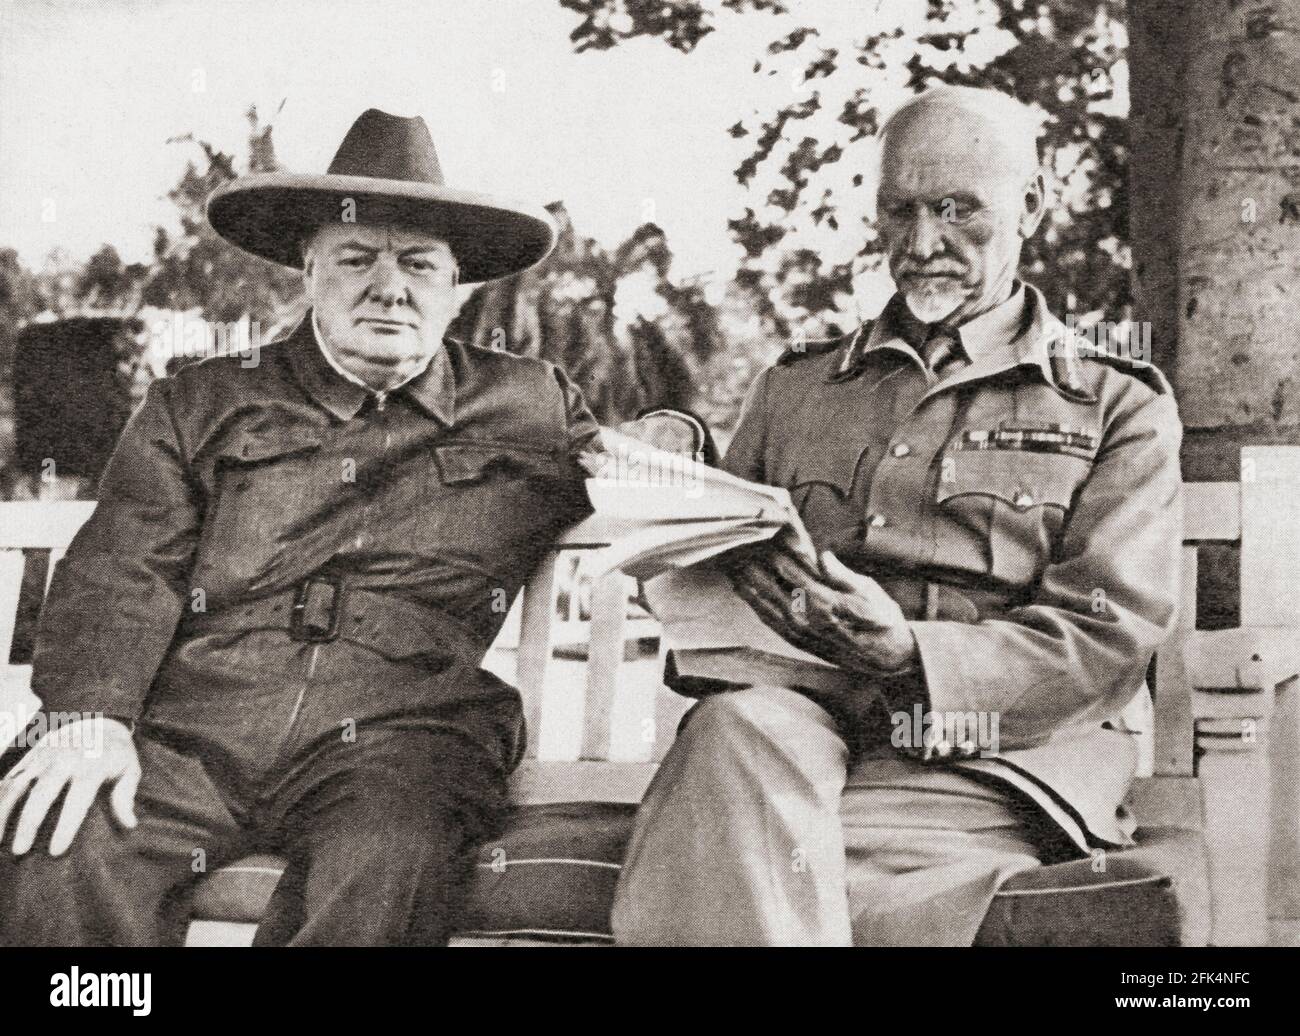 Winston Churchill, left, with General Smuts, Cairo, Egypt, 1942.  Sir Winston Leonard Spencer-Churchill, 1874 – 1965. British politician, army officer, writer and twice Prime Minister of the United Kingdom.  Field Marshal Jan Christian Smuts, 1870 – 1950.  South African statesman, military leader, and philosopher Stock Photo